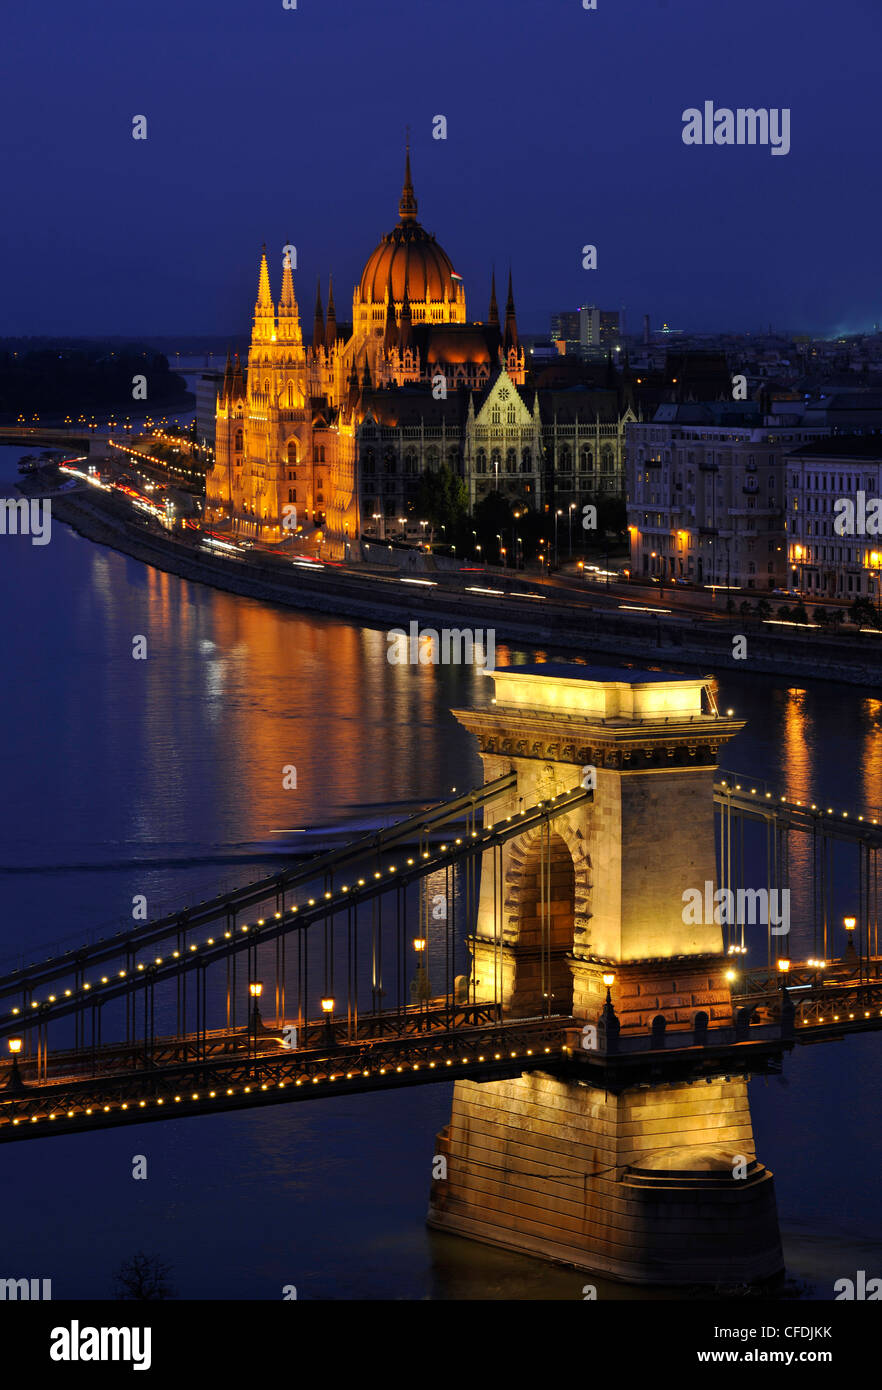 Danube river, House of Parliament and Chain Bridge at night, Budapest, Hungary, Europe Stock Photo